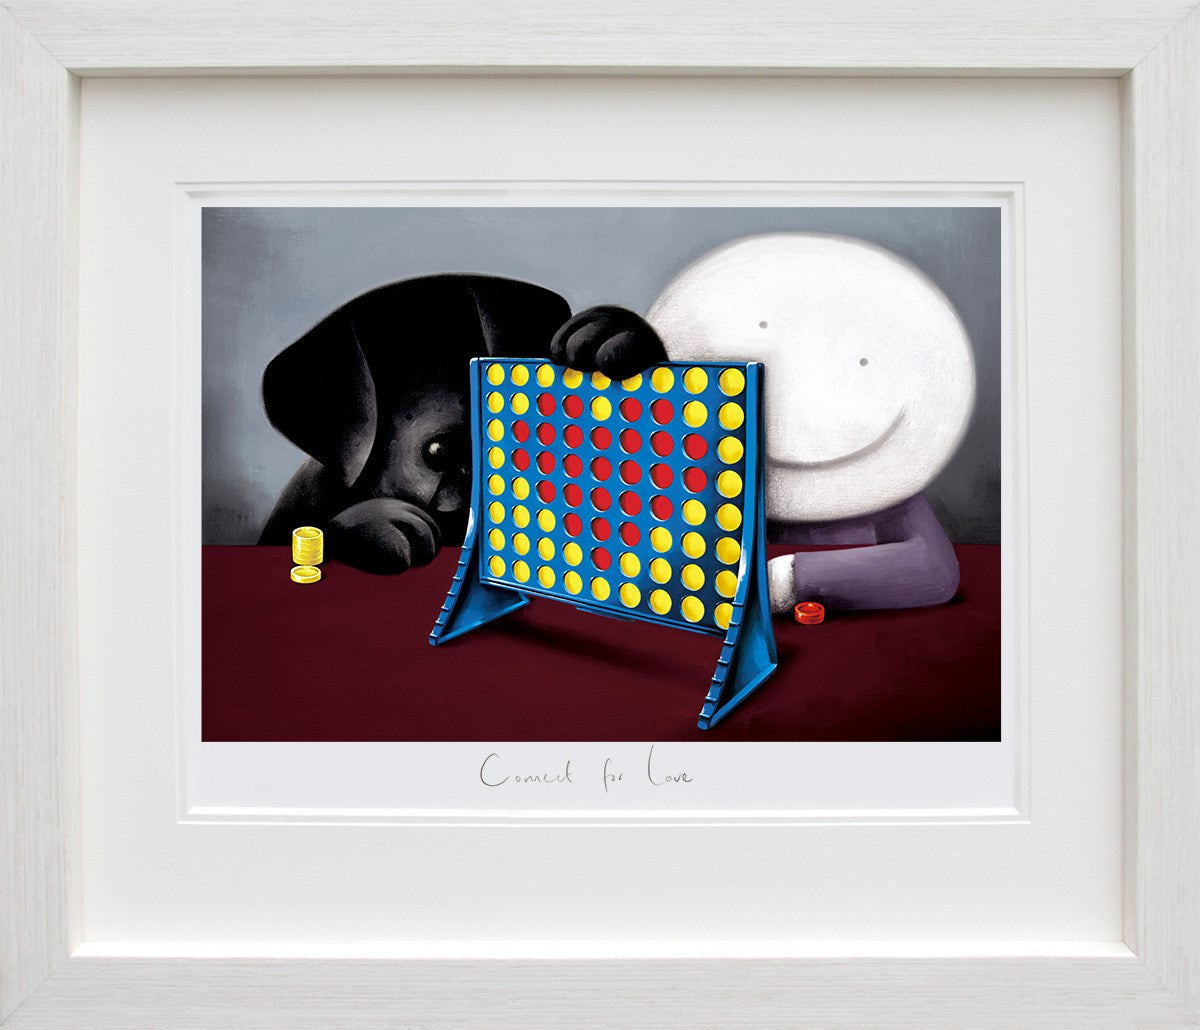 Connect 4 Love by Doug Hyde